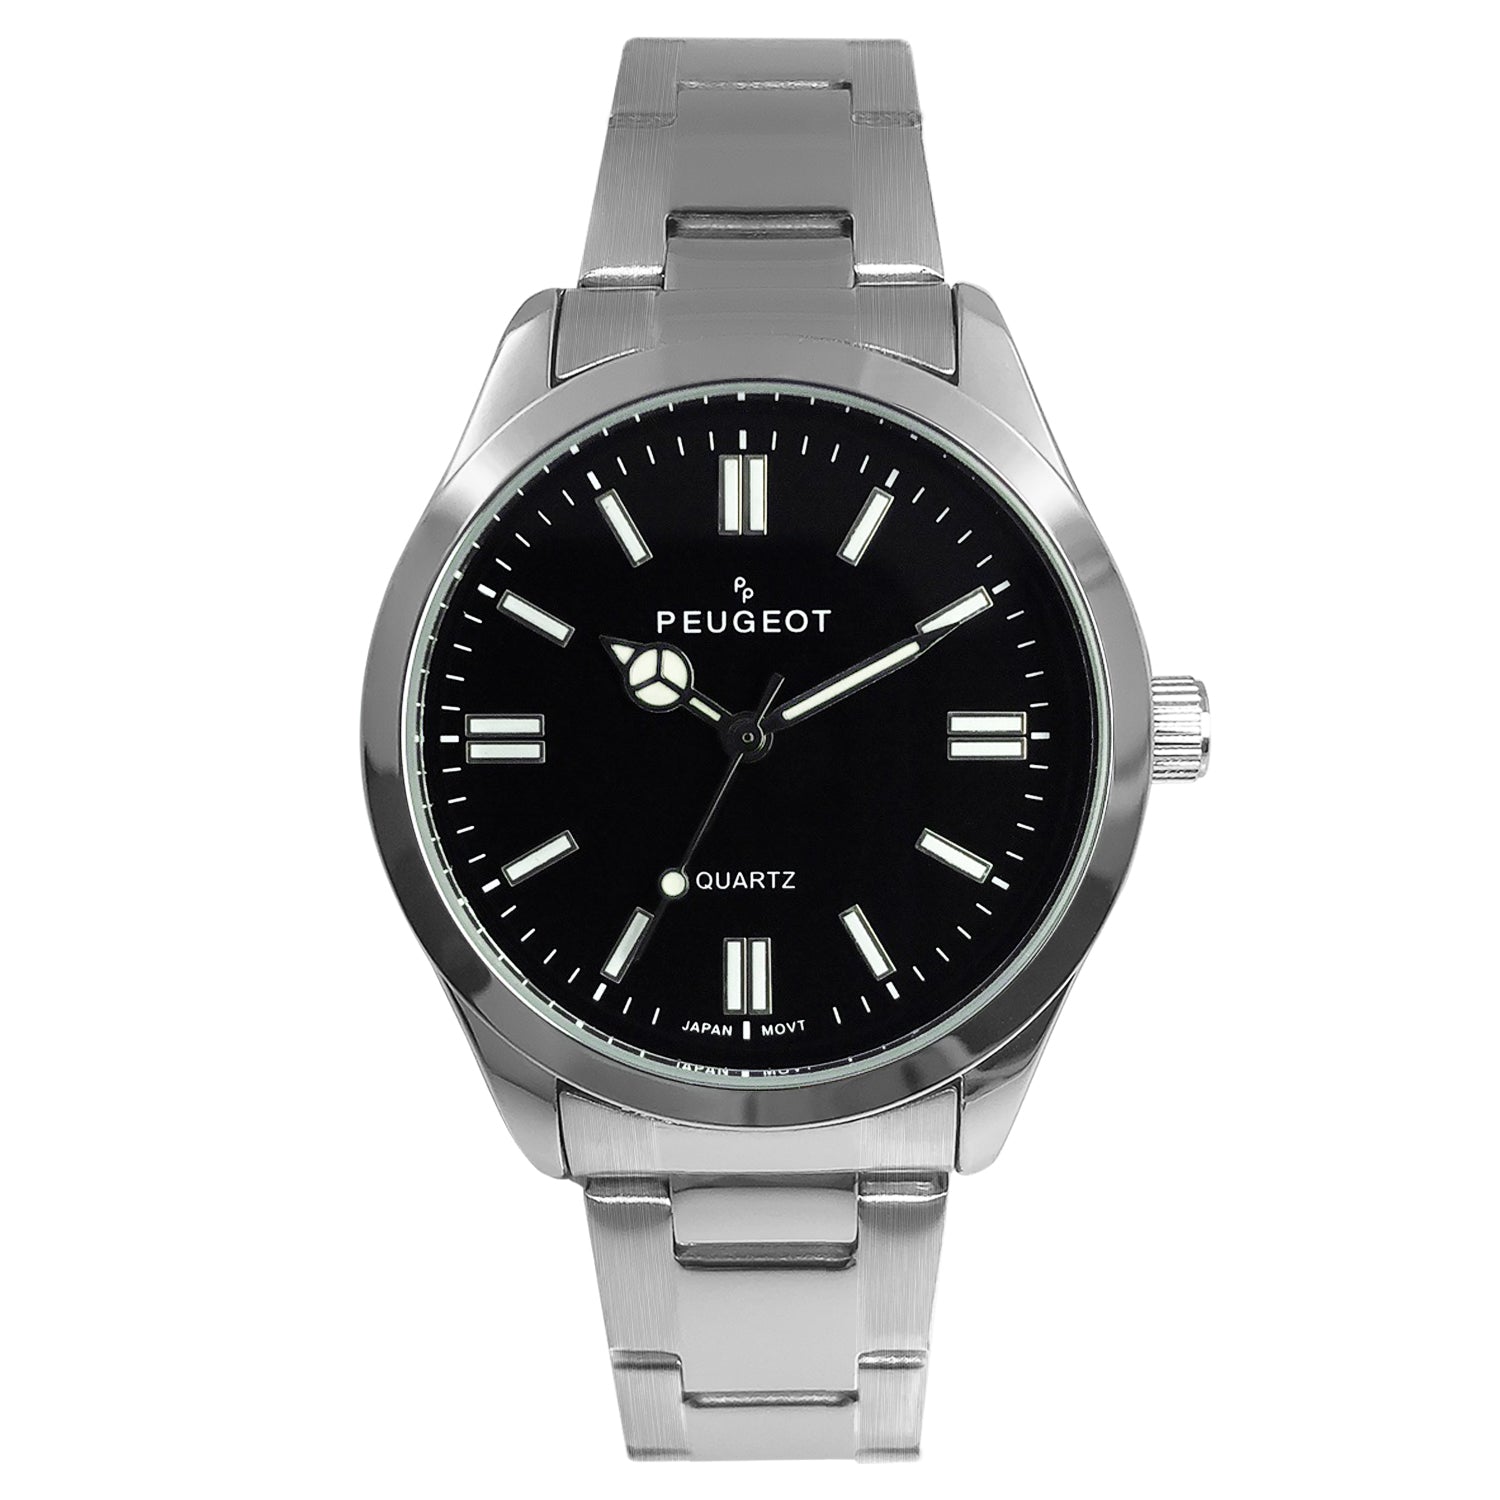 Women's 36mm Sport Watch with Black Dial and Stainless Steel